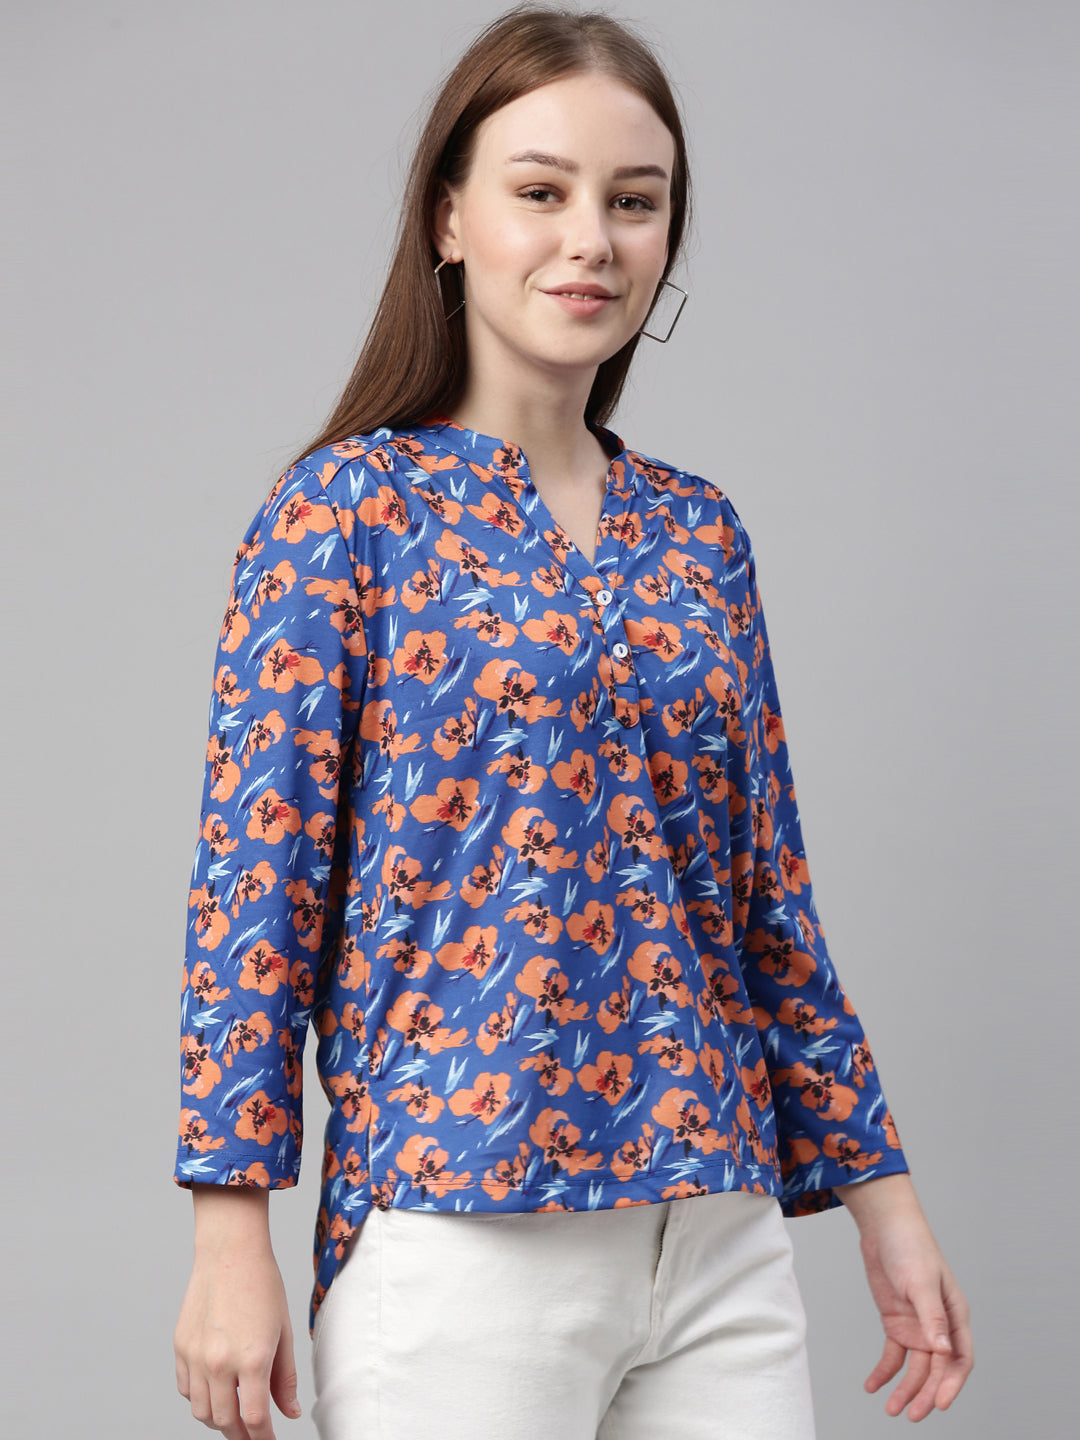 ERIKA02 (100% POLYESTER PRINT CASUAL TOPS FOR WOMENS)